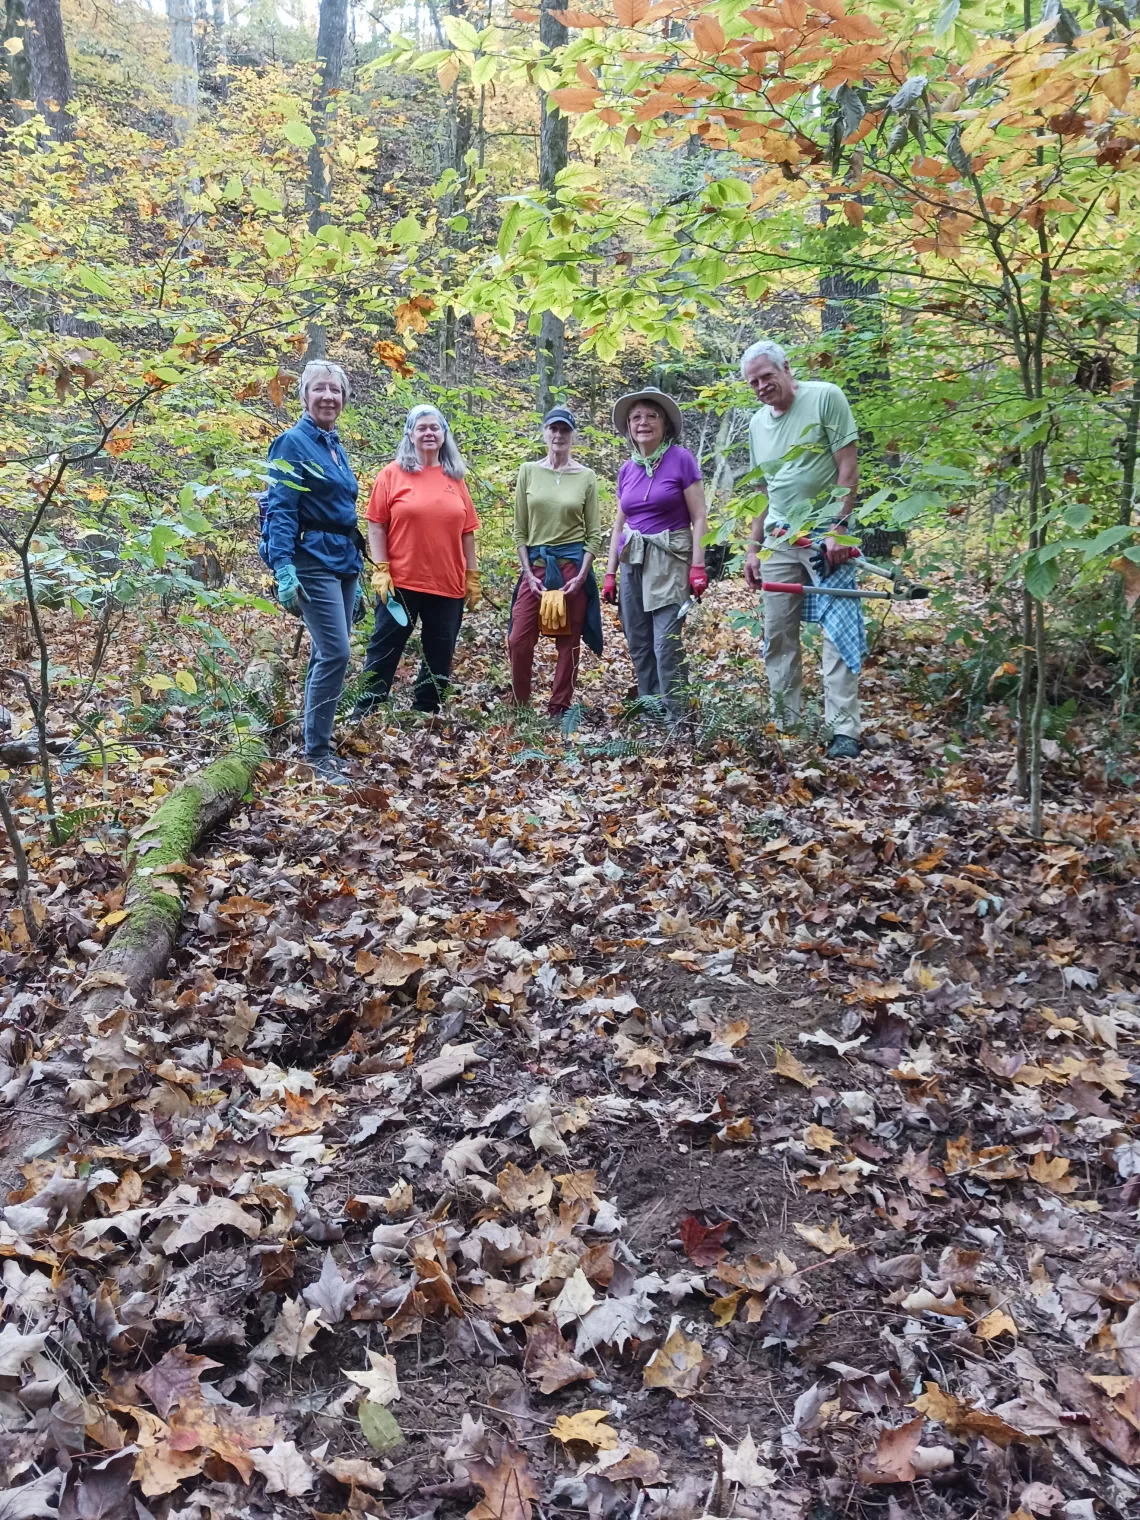 Five people stood in a forest. Some are holding gardening tools. They are all turned towards the camera and smiling. There are many brown leaves on the ground.